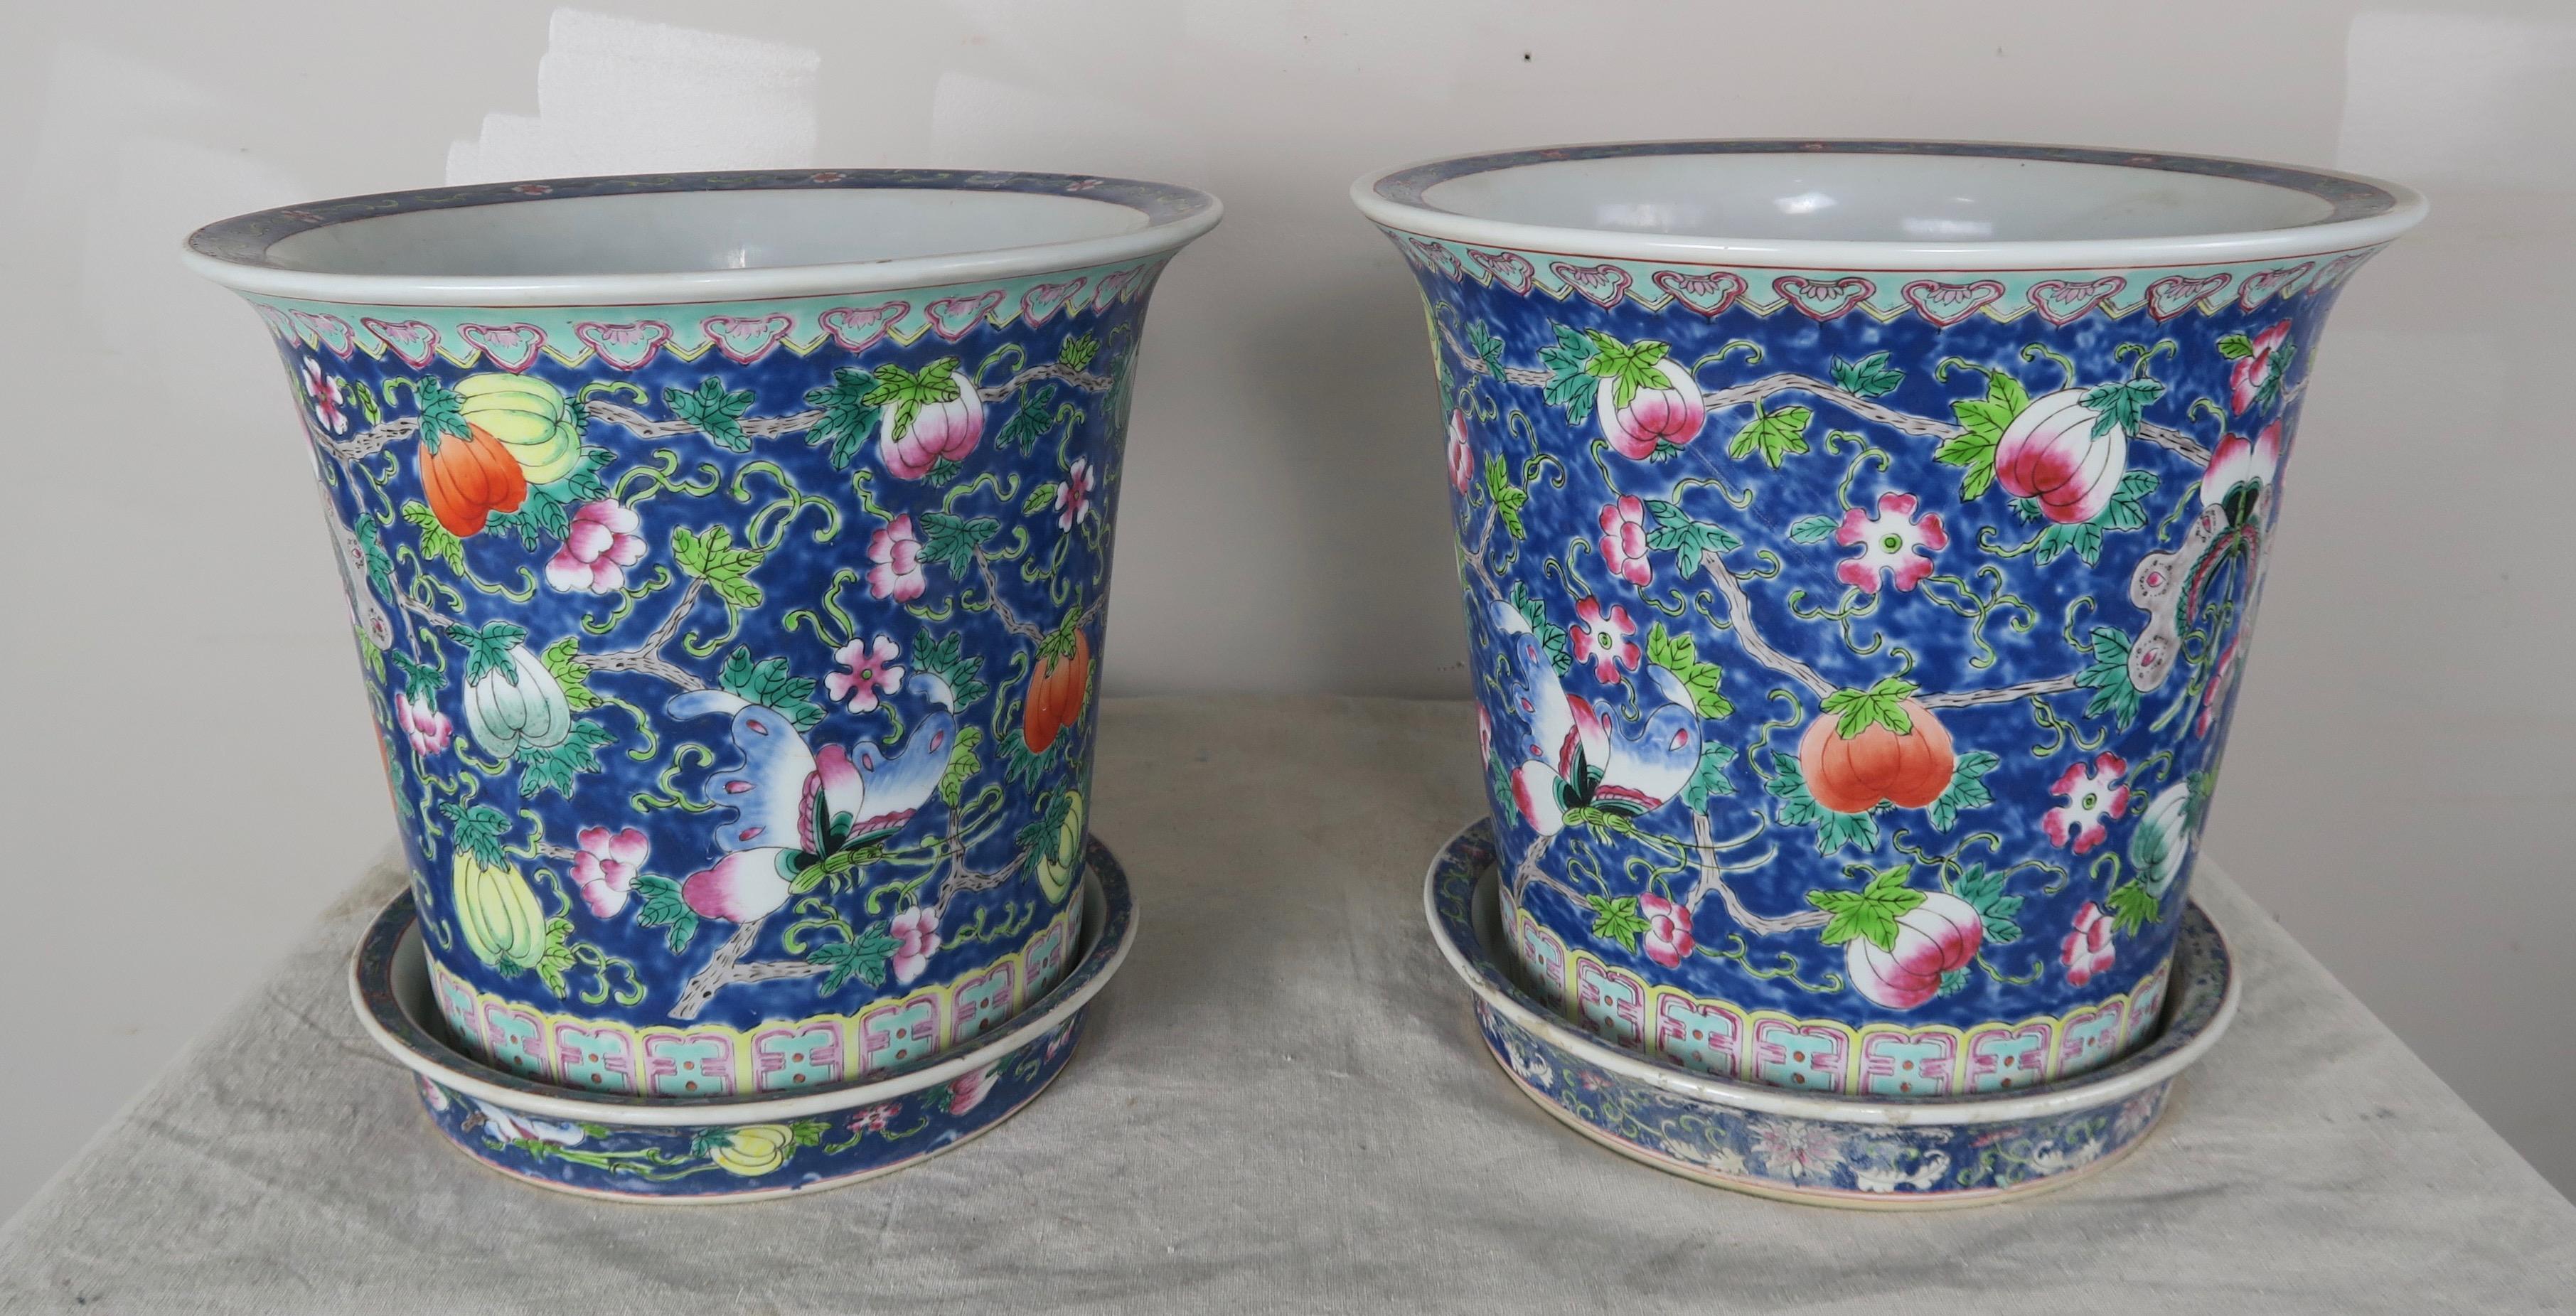 Pair of beautifully painted glazed ceramic pots in shades of blue, green and tangerine. The pots include saucers. Notice the beautiful images painted including pumpkins, flowers, butterflies and so much more.